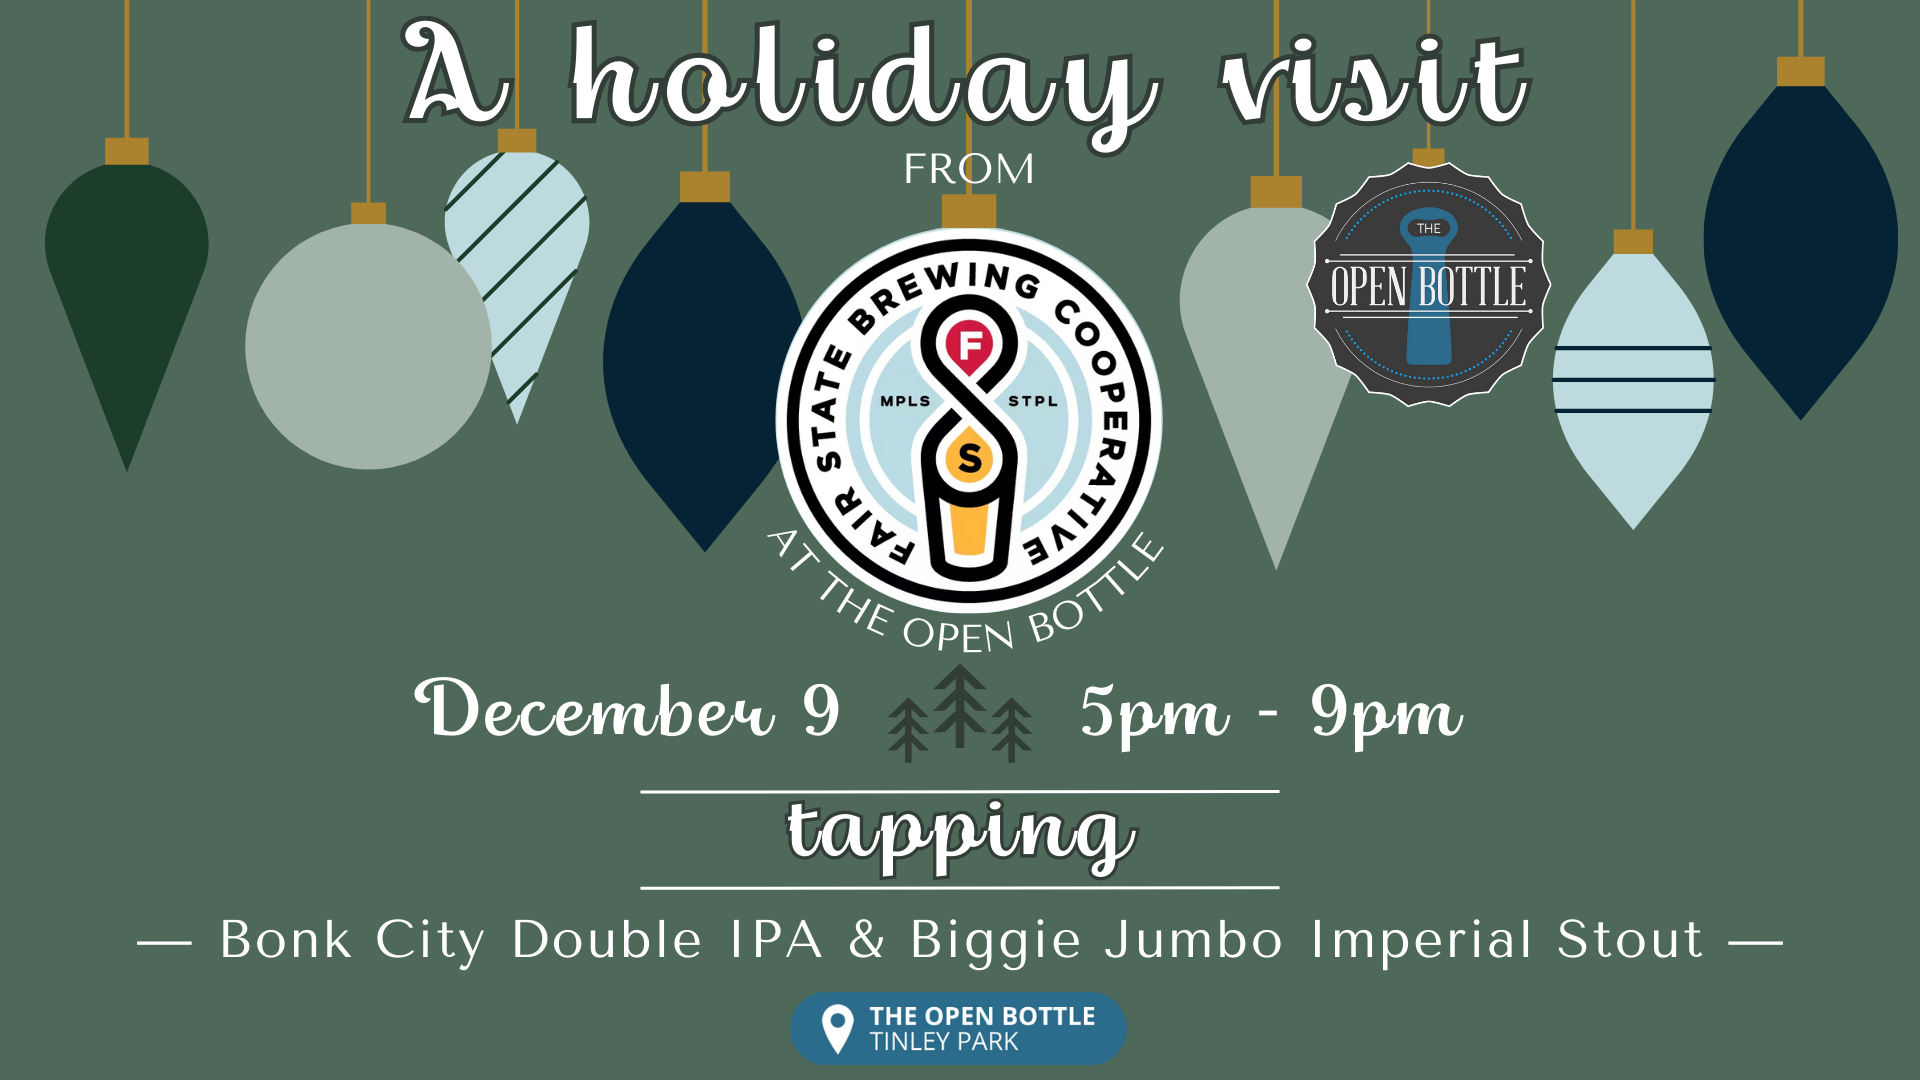 Event: A Holiday Visit from Fair State Brewing Co-Op